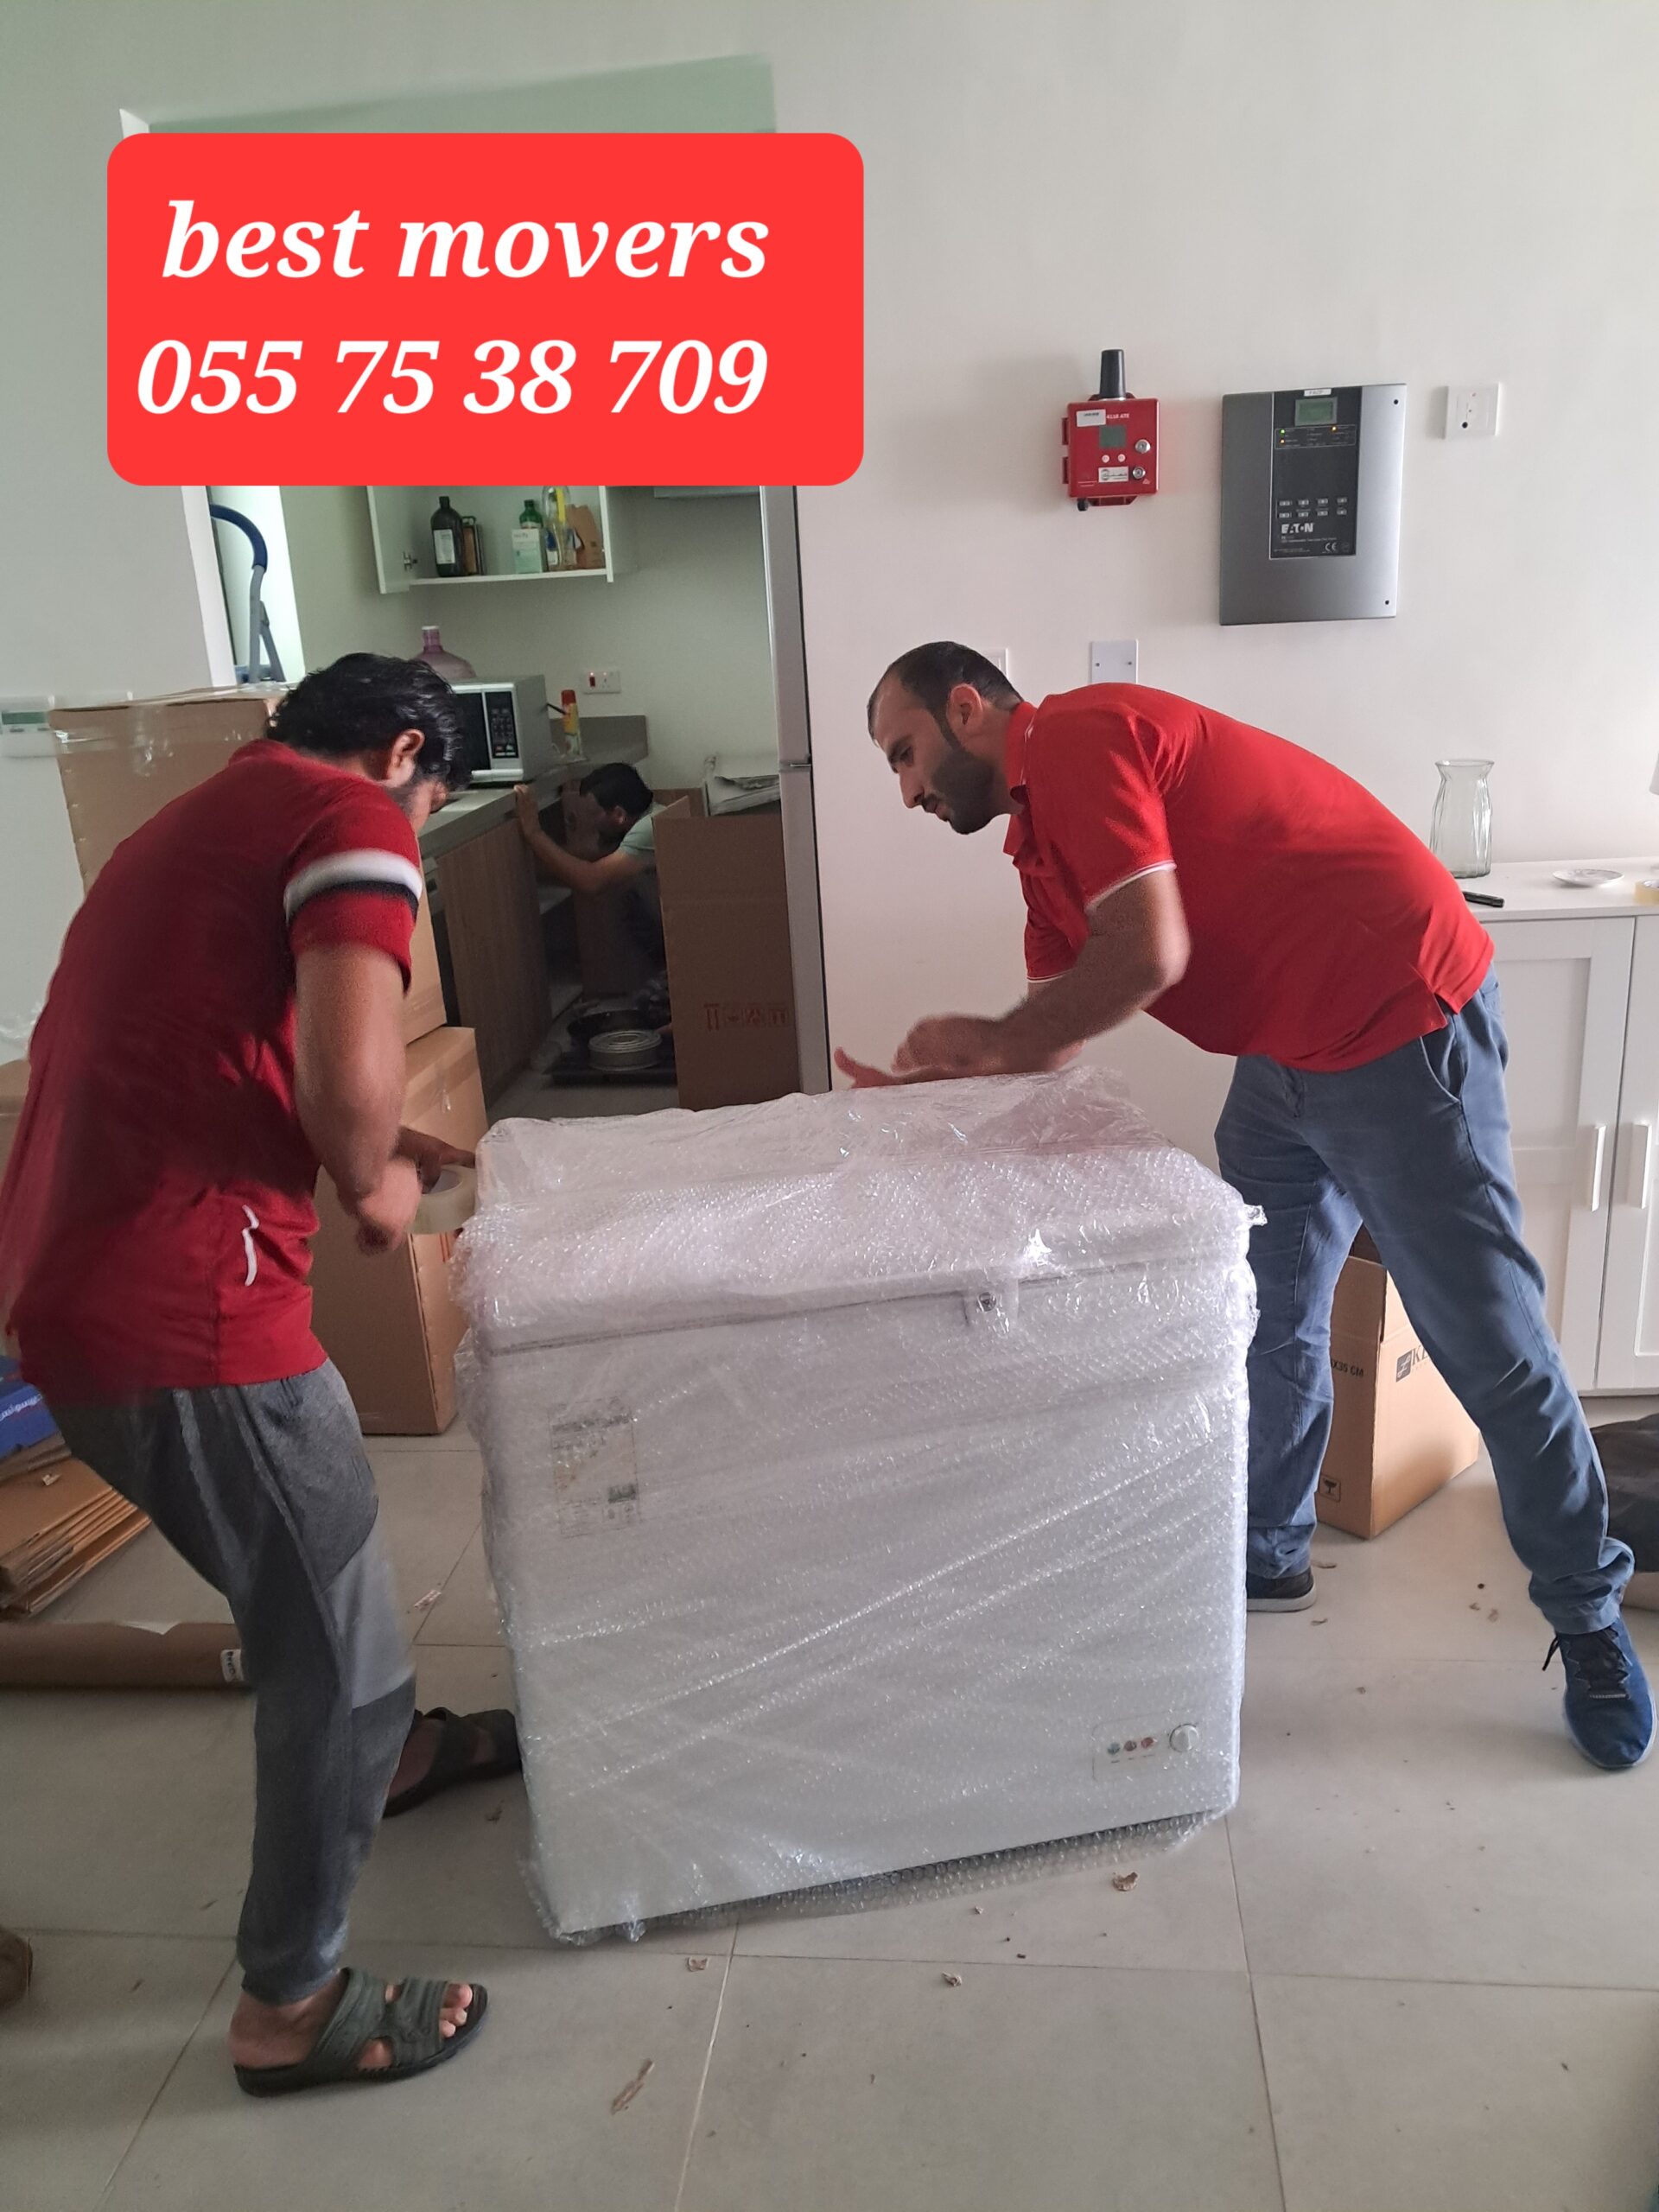 BEST HOME MOVERS AND PACKERS UAE 055 75 38 709